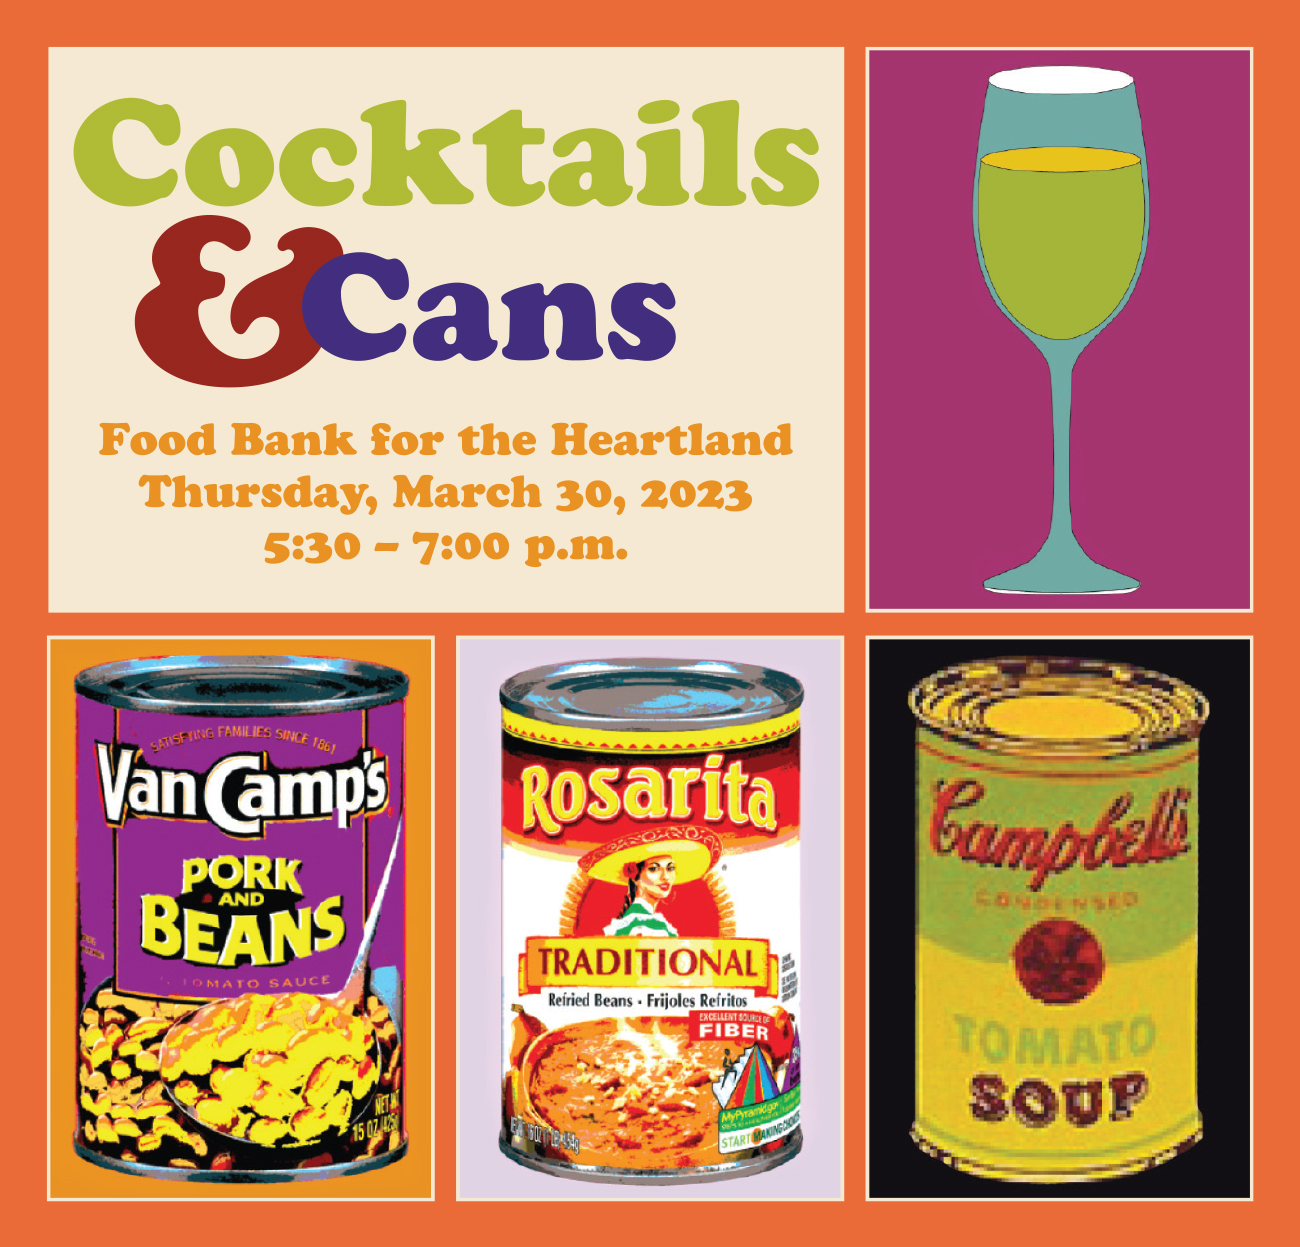 Cocktails & Cans invite Andy Warhol-inspired design